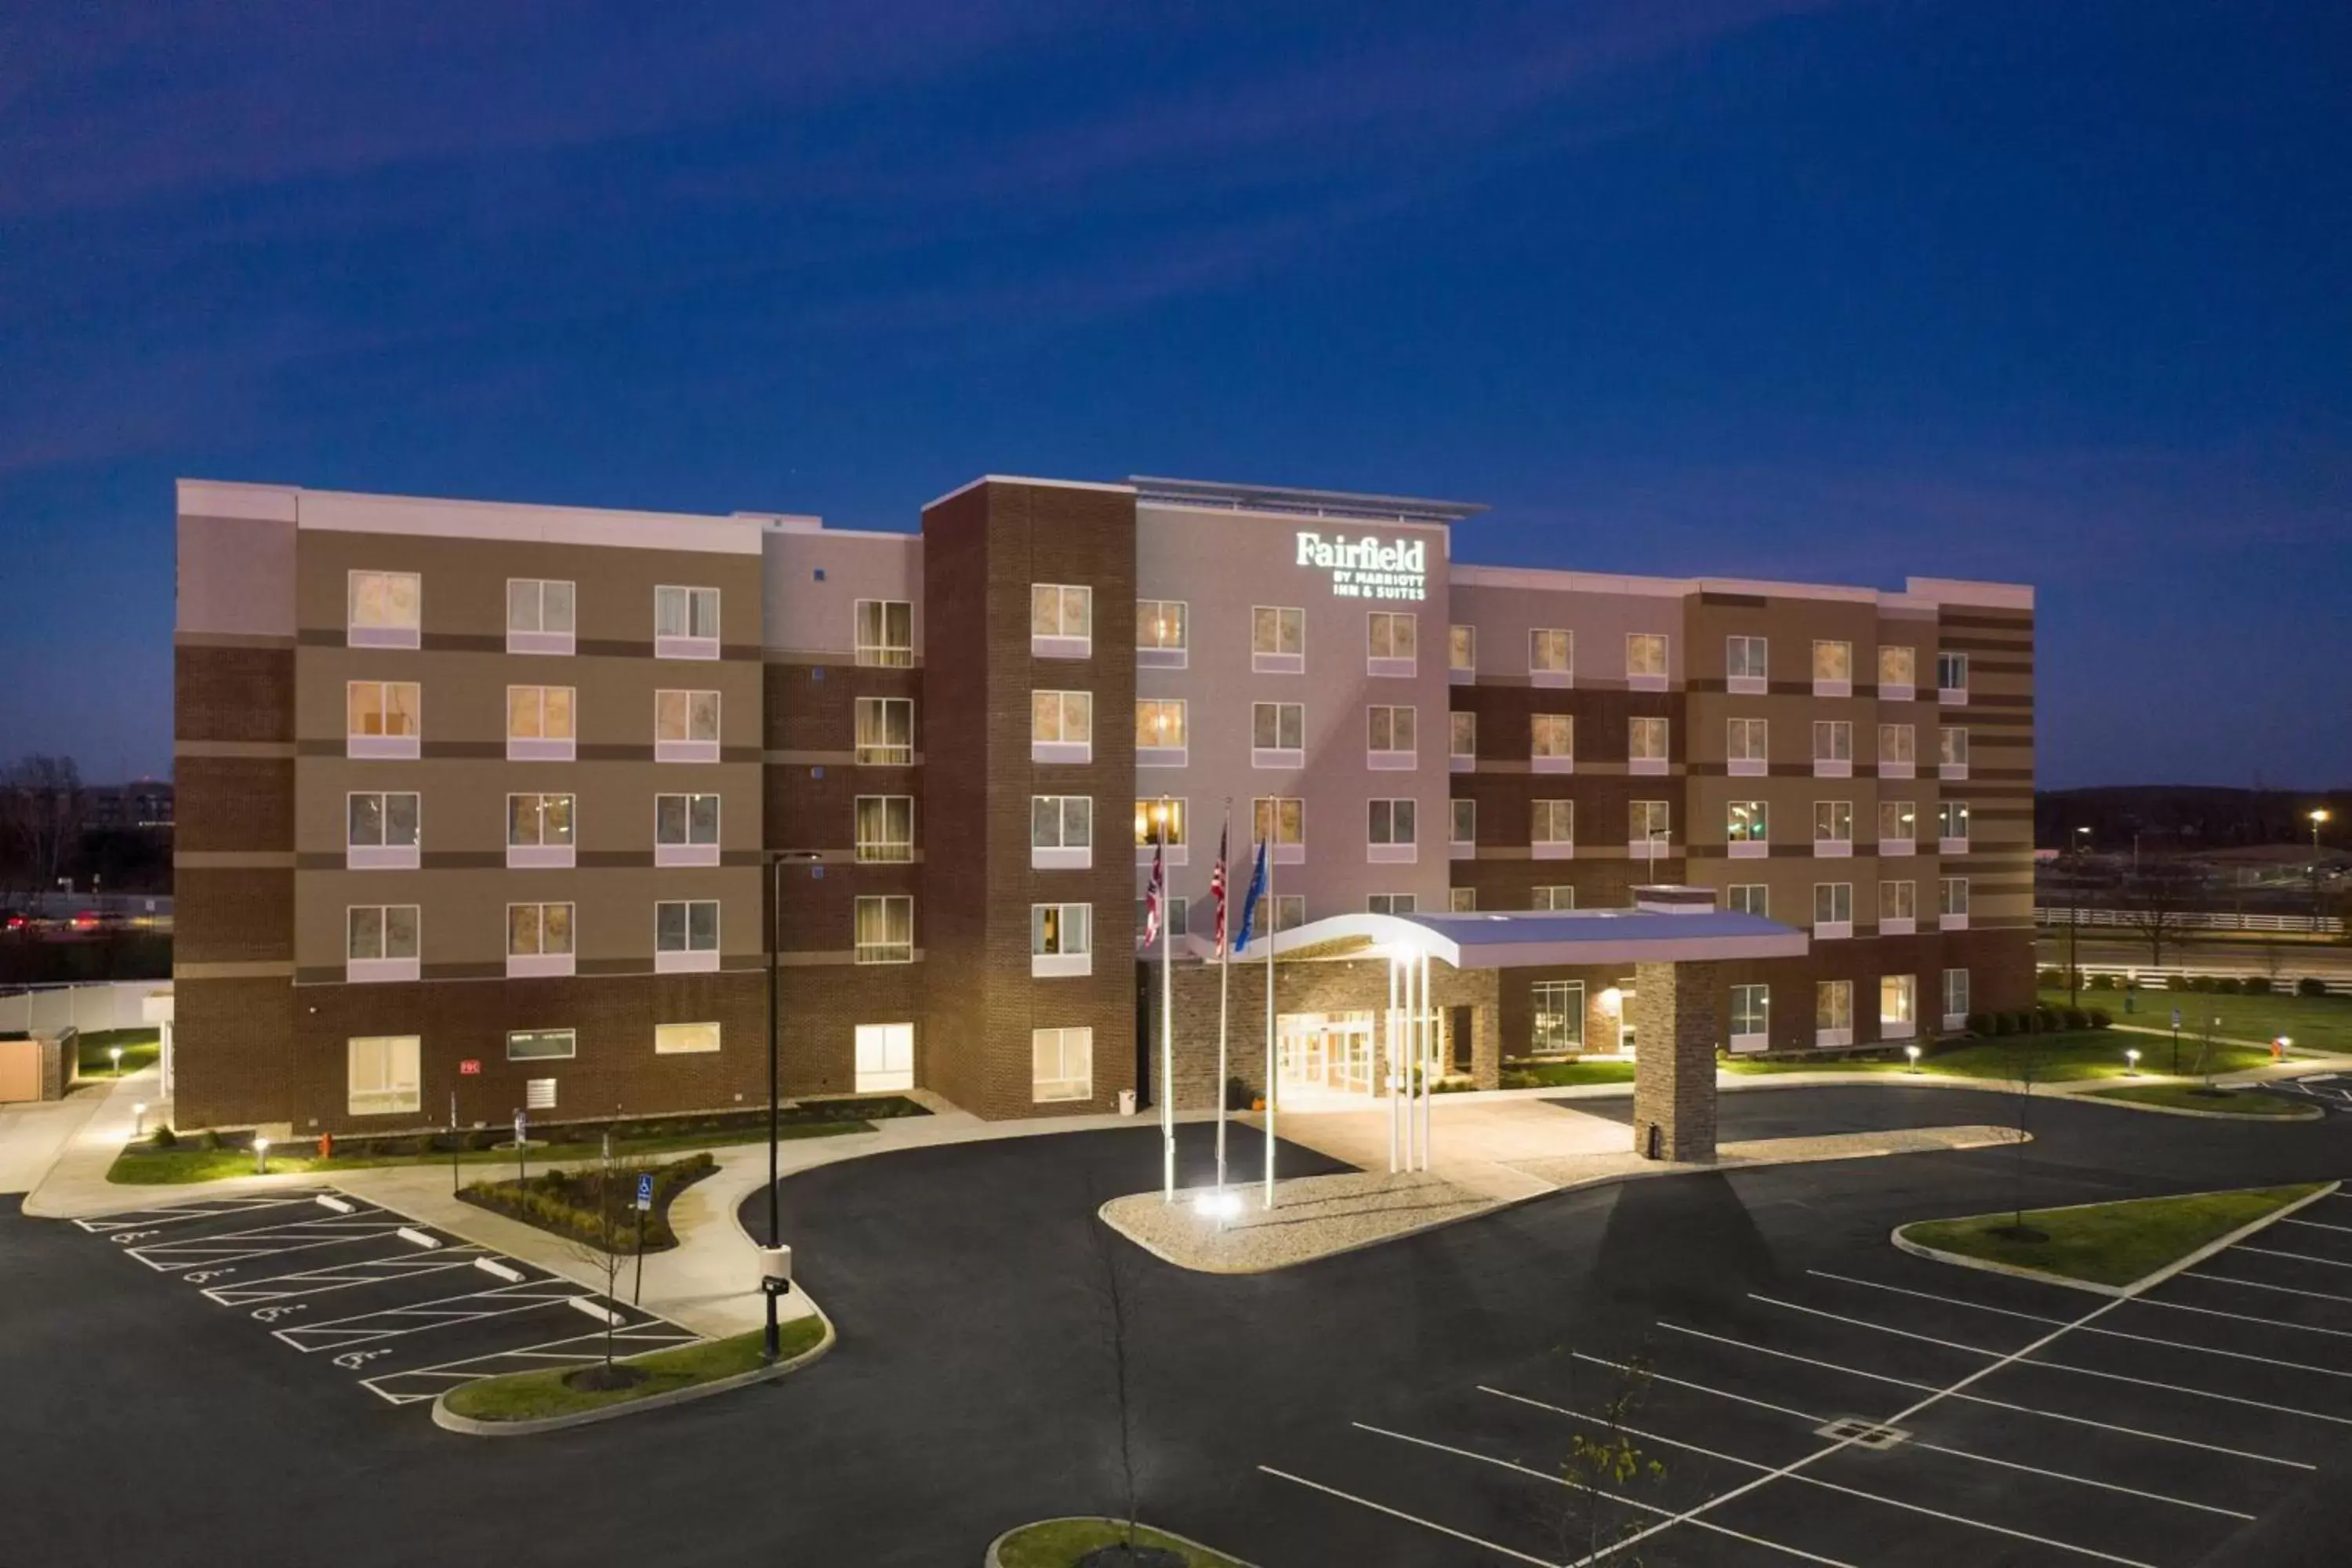 Property Building in Fairfield Inn & Suites Columbus New Albany